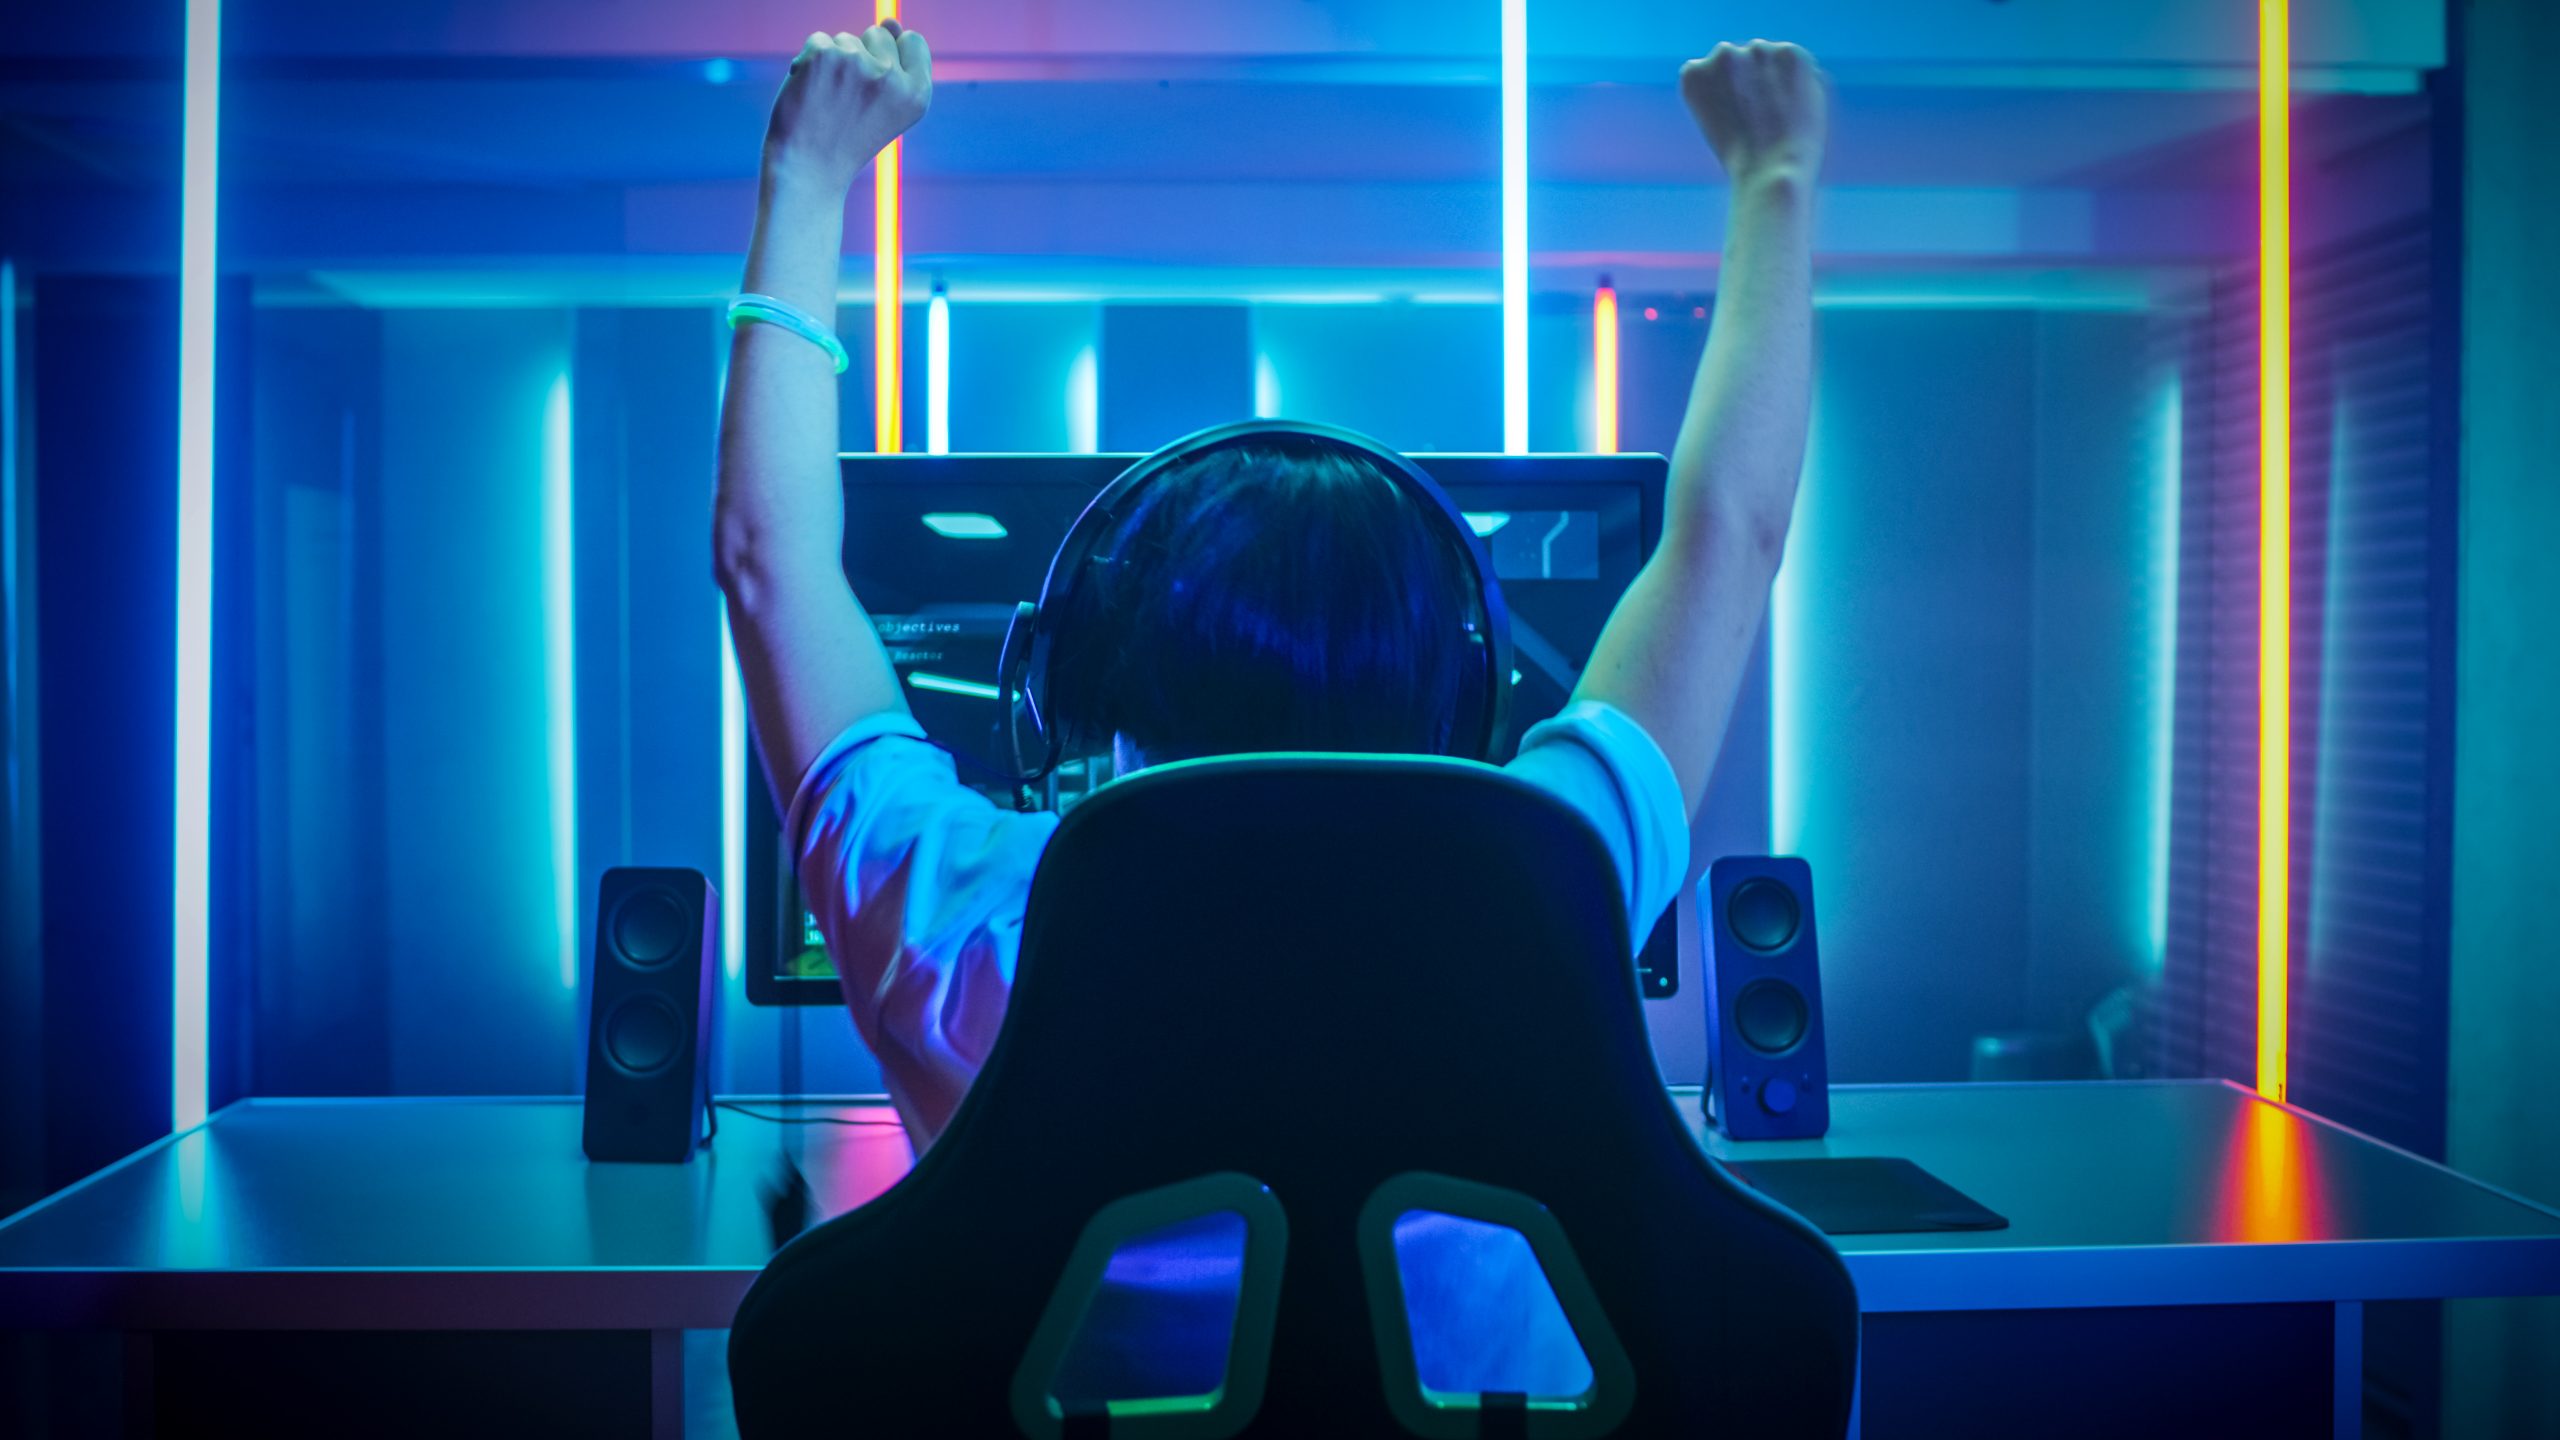 An e-sports athlete celebrating in front of his monitor